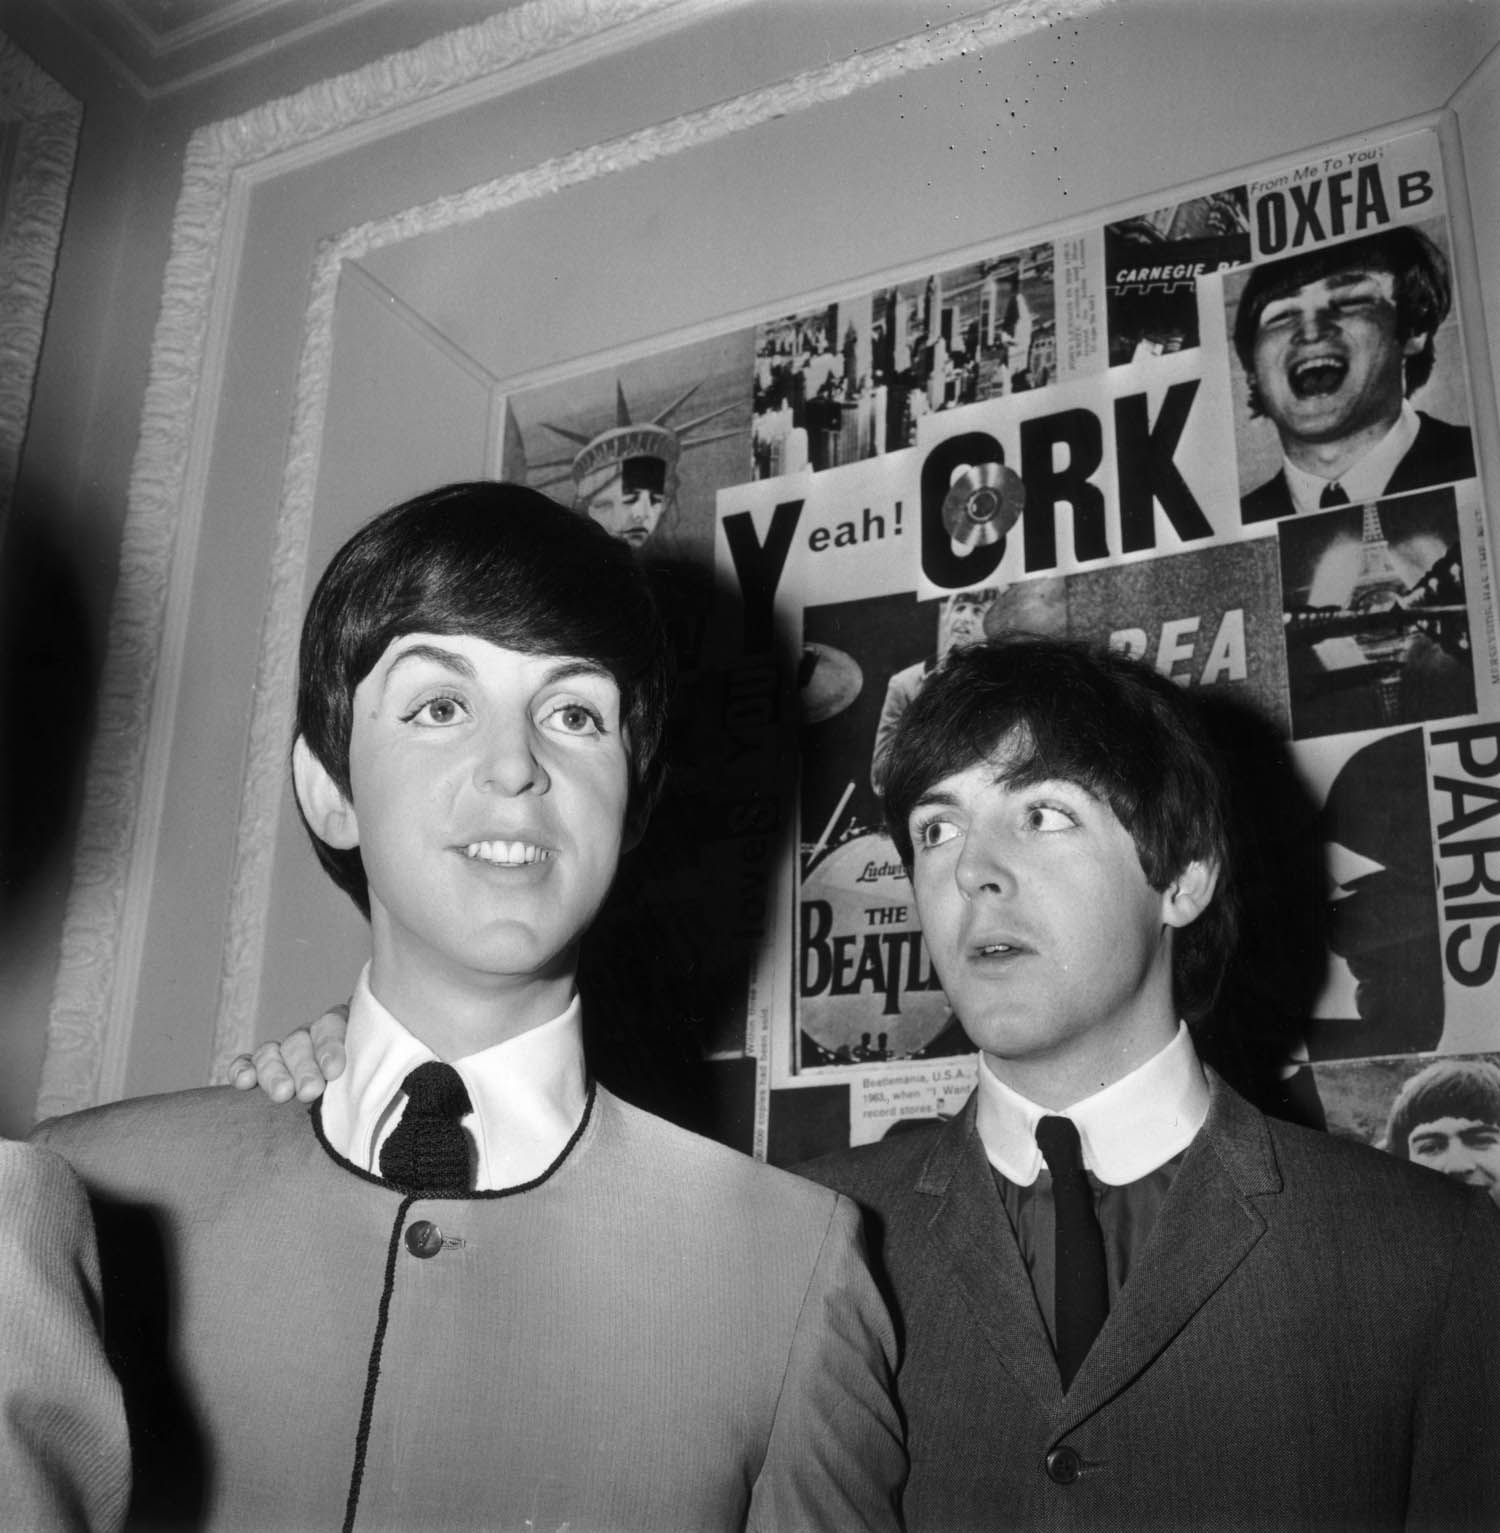 Paul McCartney at Madame Tussaud's waxworks with his newly unveiled effigy in London, England, April 29, 1964.